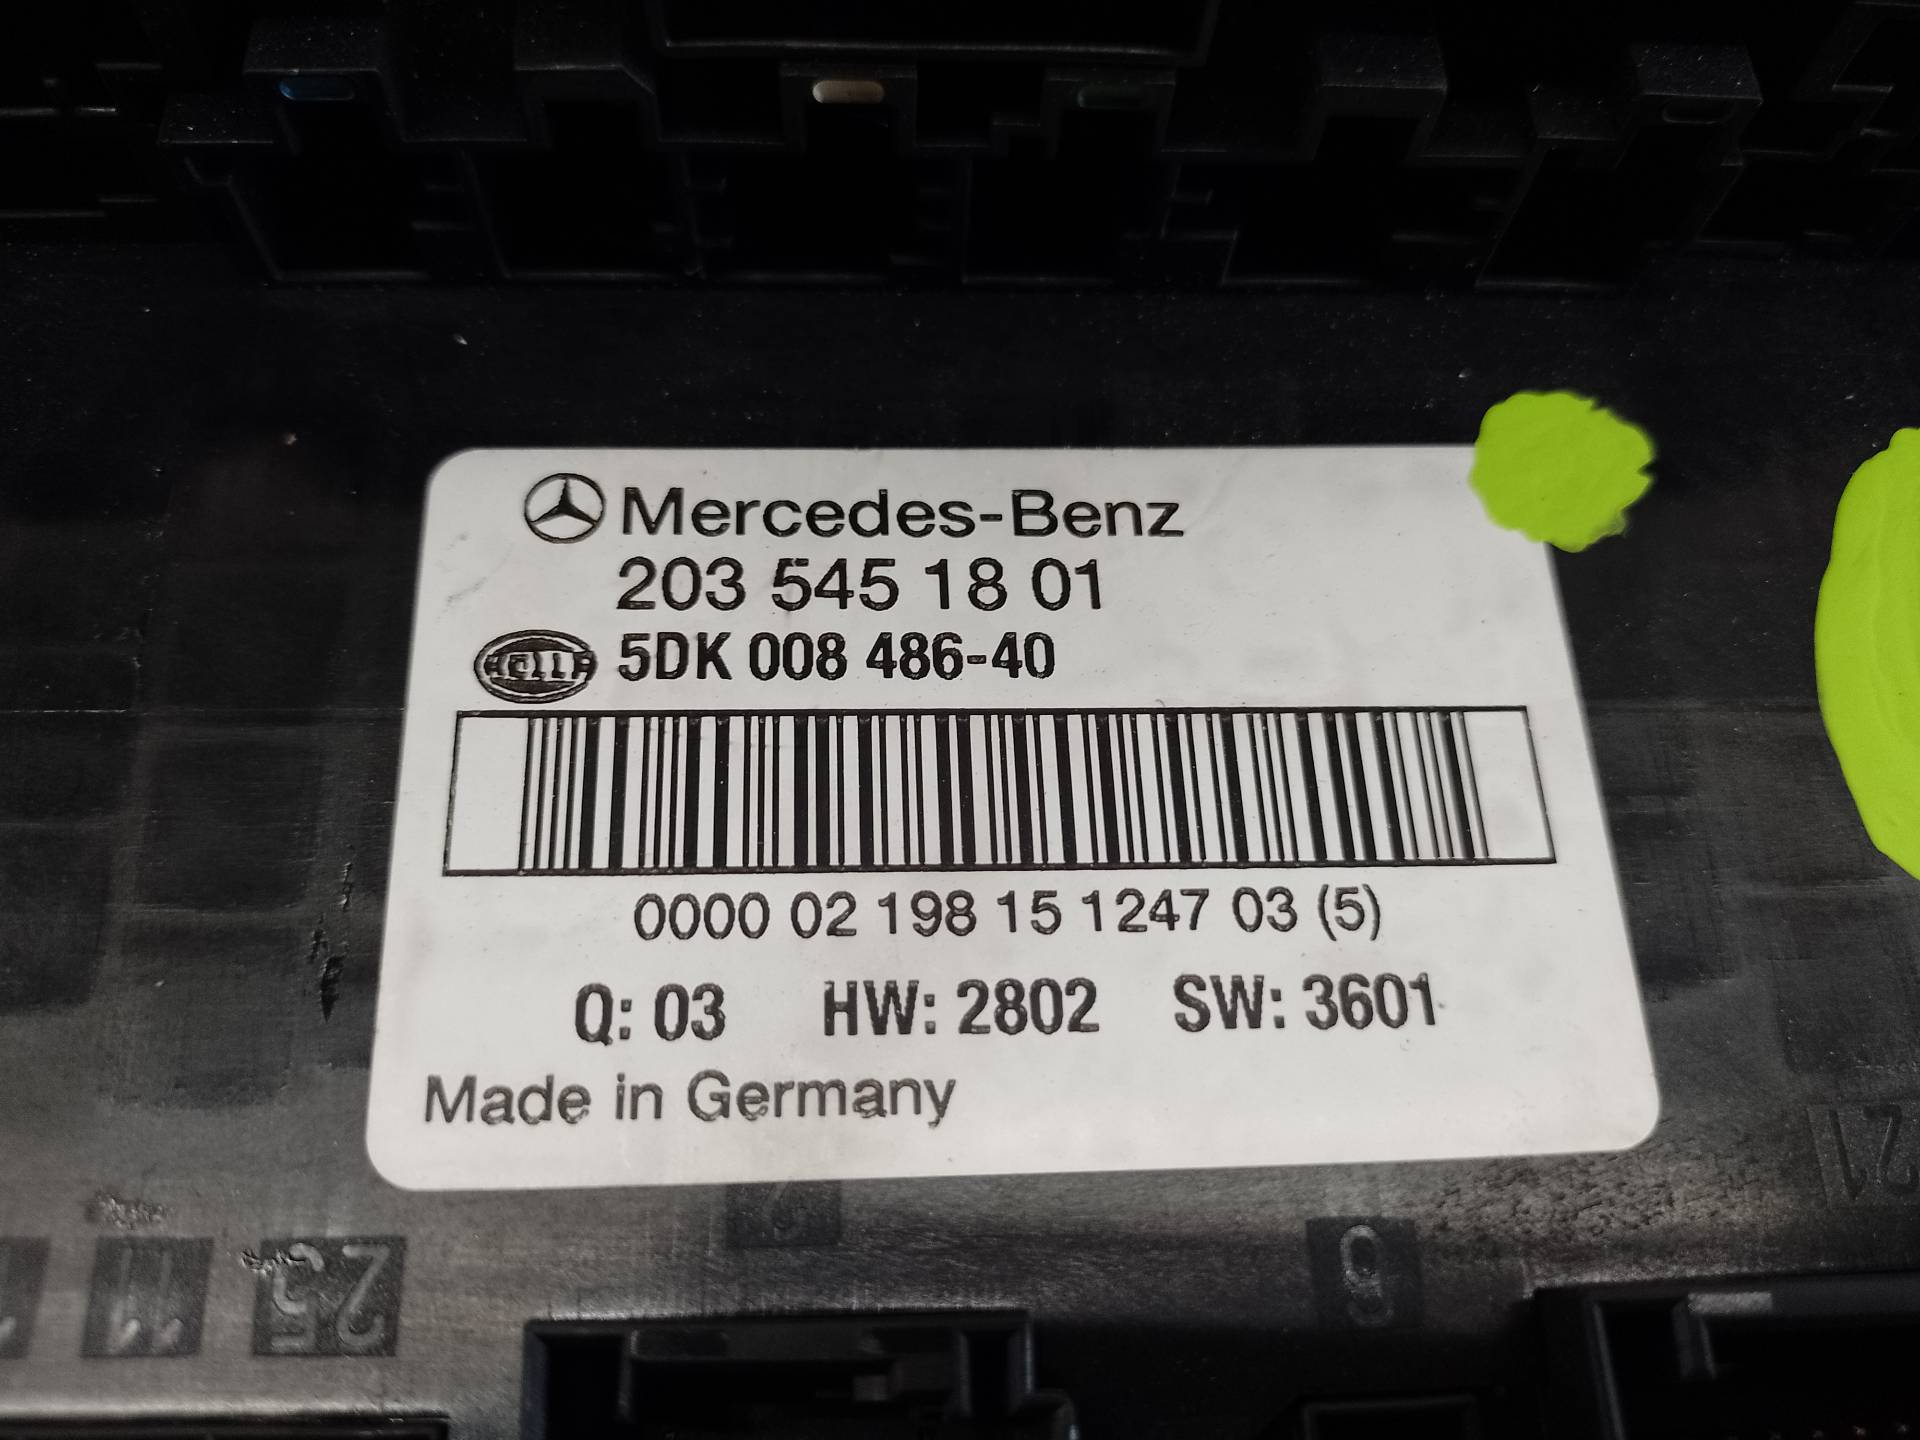 MERCEDES-BENZ C-Class W203/S203/CL203 (2000-2008) Sulakekaappi 2035451801 25391586